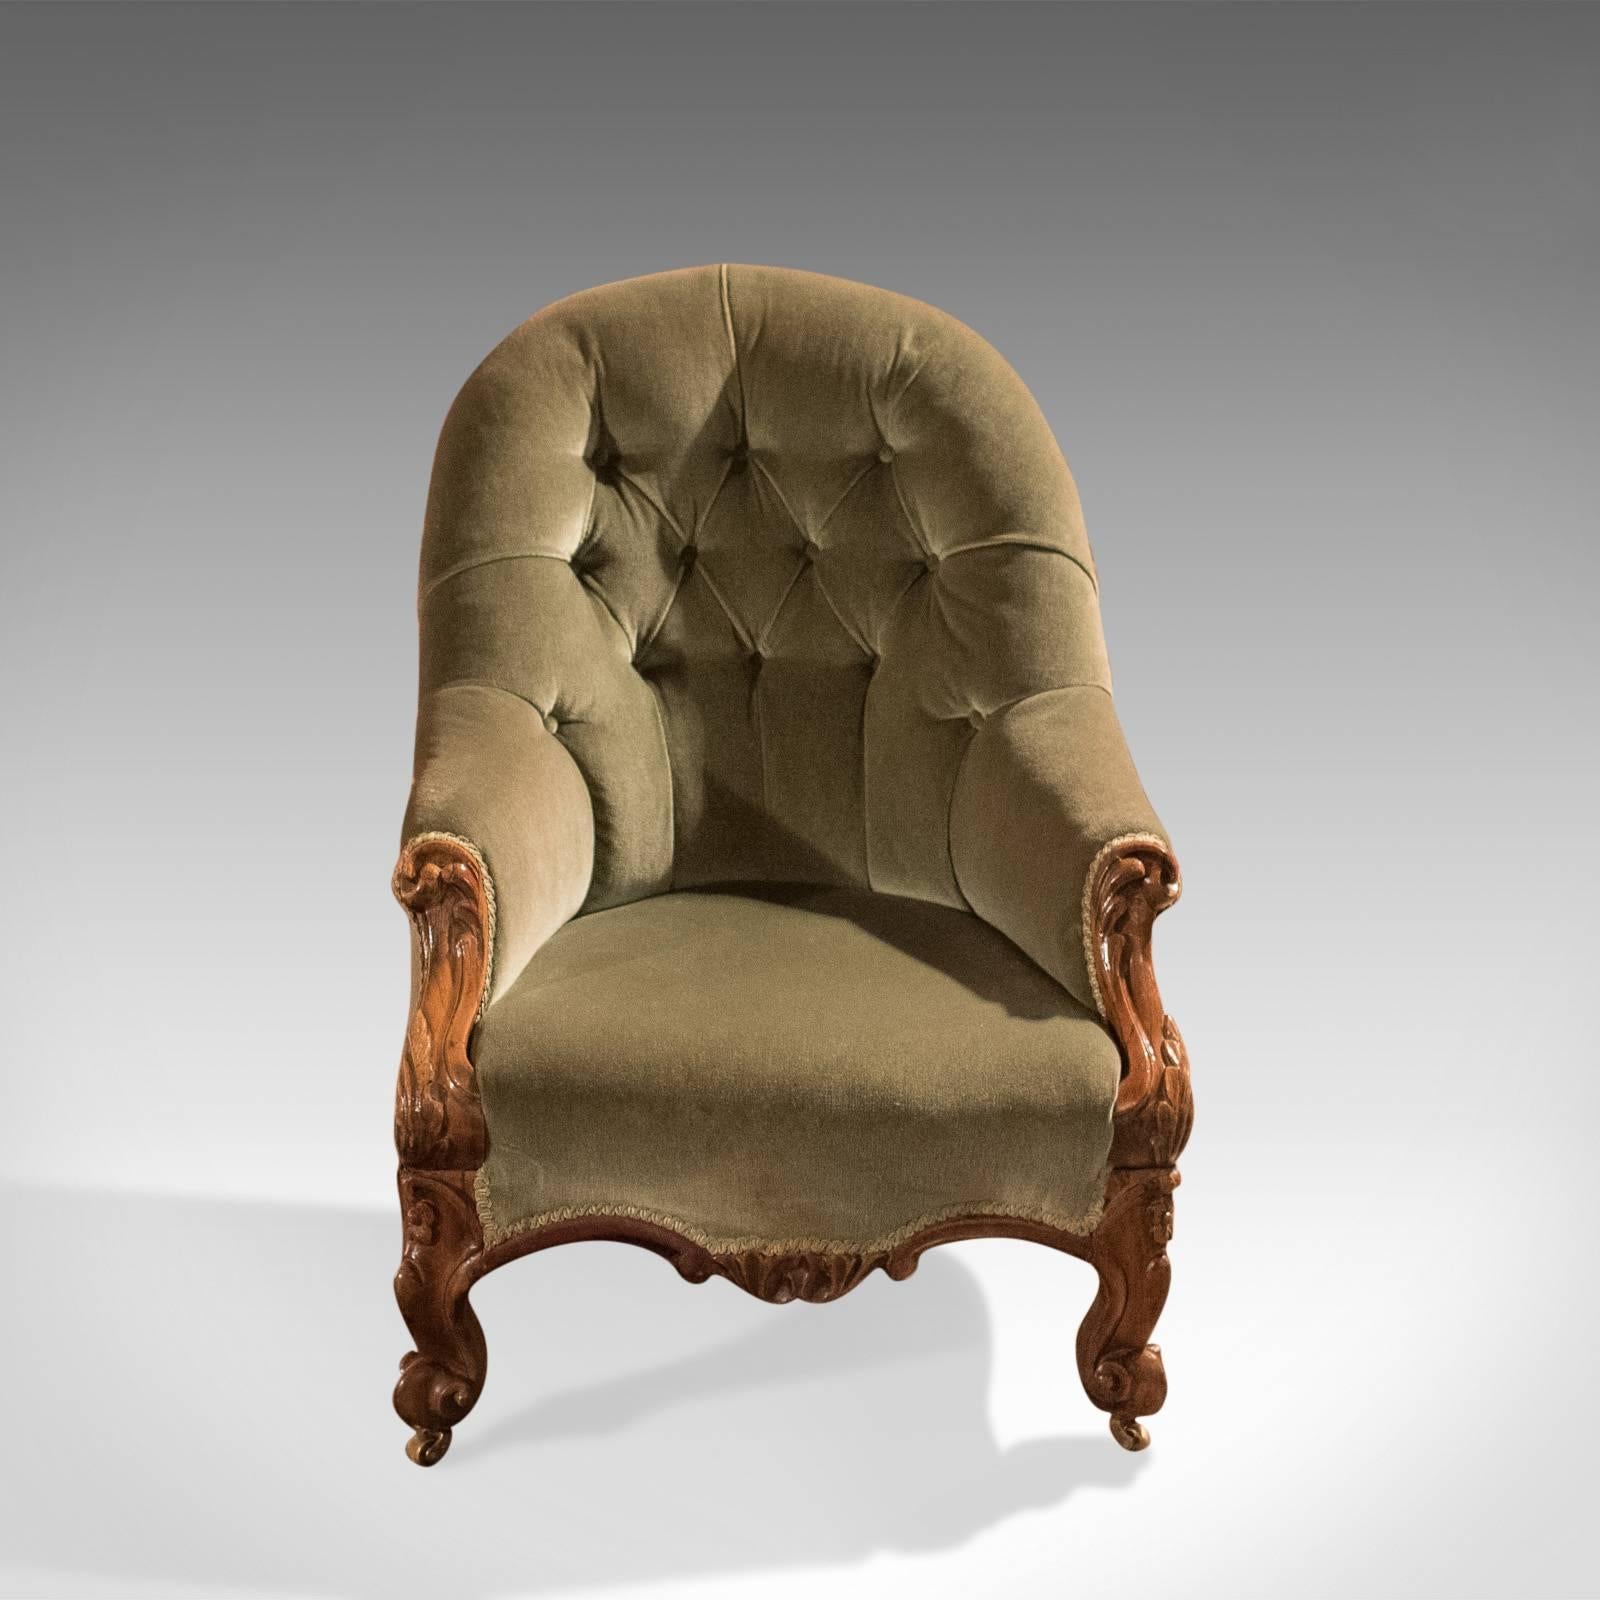 This is an early Victorian, button-back, antique salon chair offering a comfortable seat and dating to circa 1840.

Superior build quality in English walnut
Raised on stout, splayed cabriole legs
Good quality carving with acanthus leaf knees and